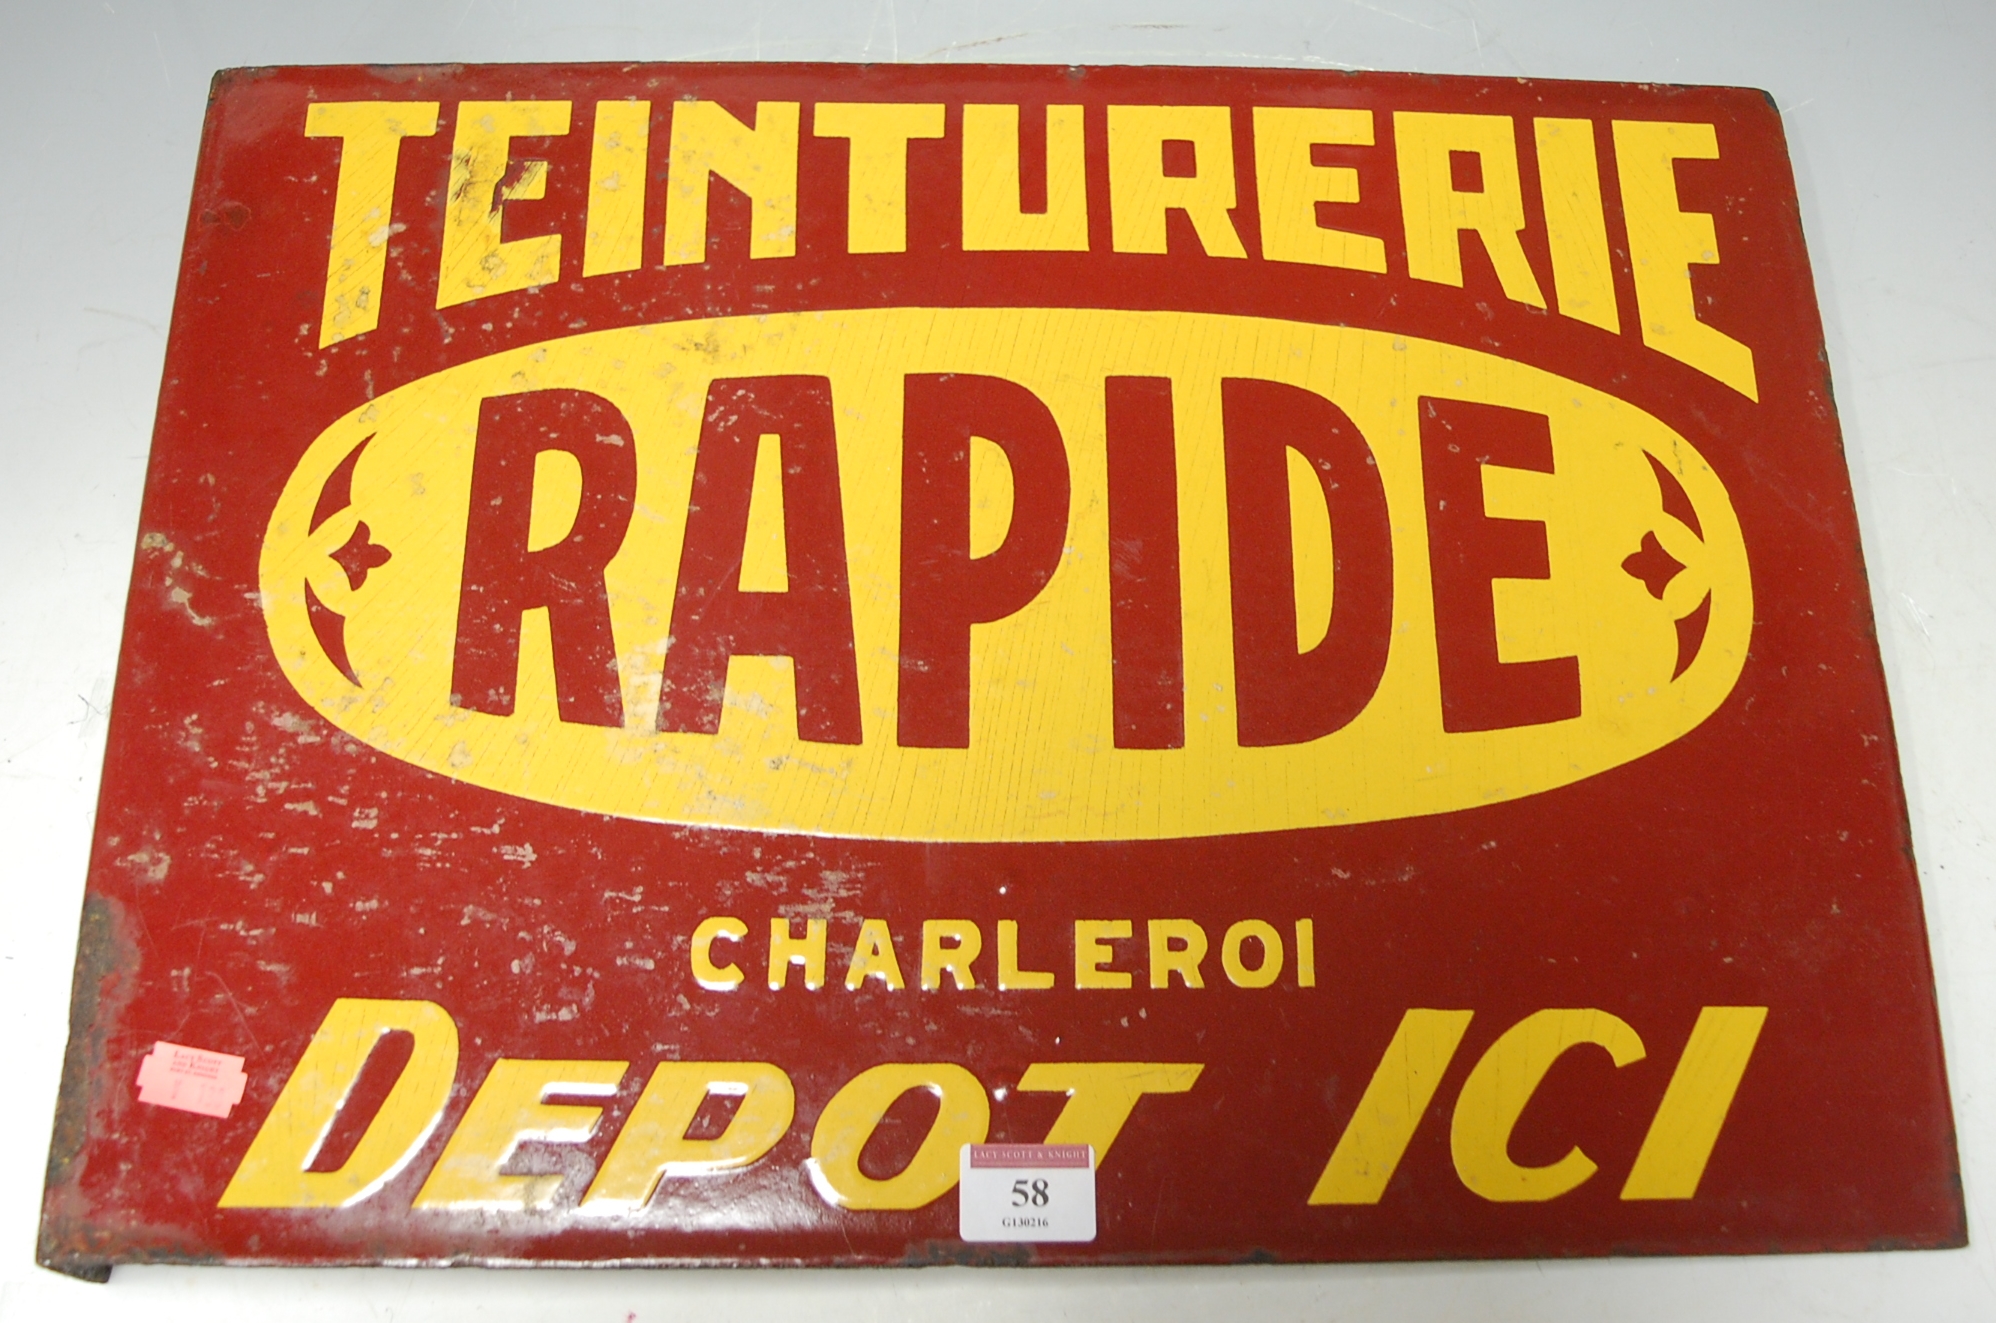 An early 20th century enamelled advertising sign for 'Teinturerie Rapide'